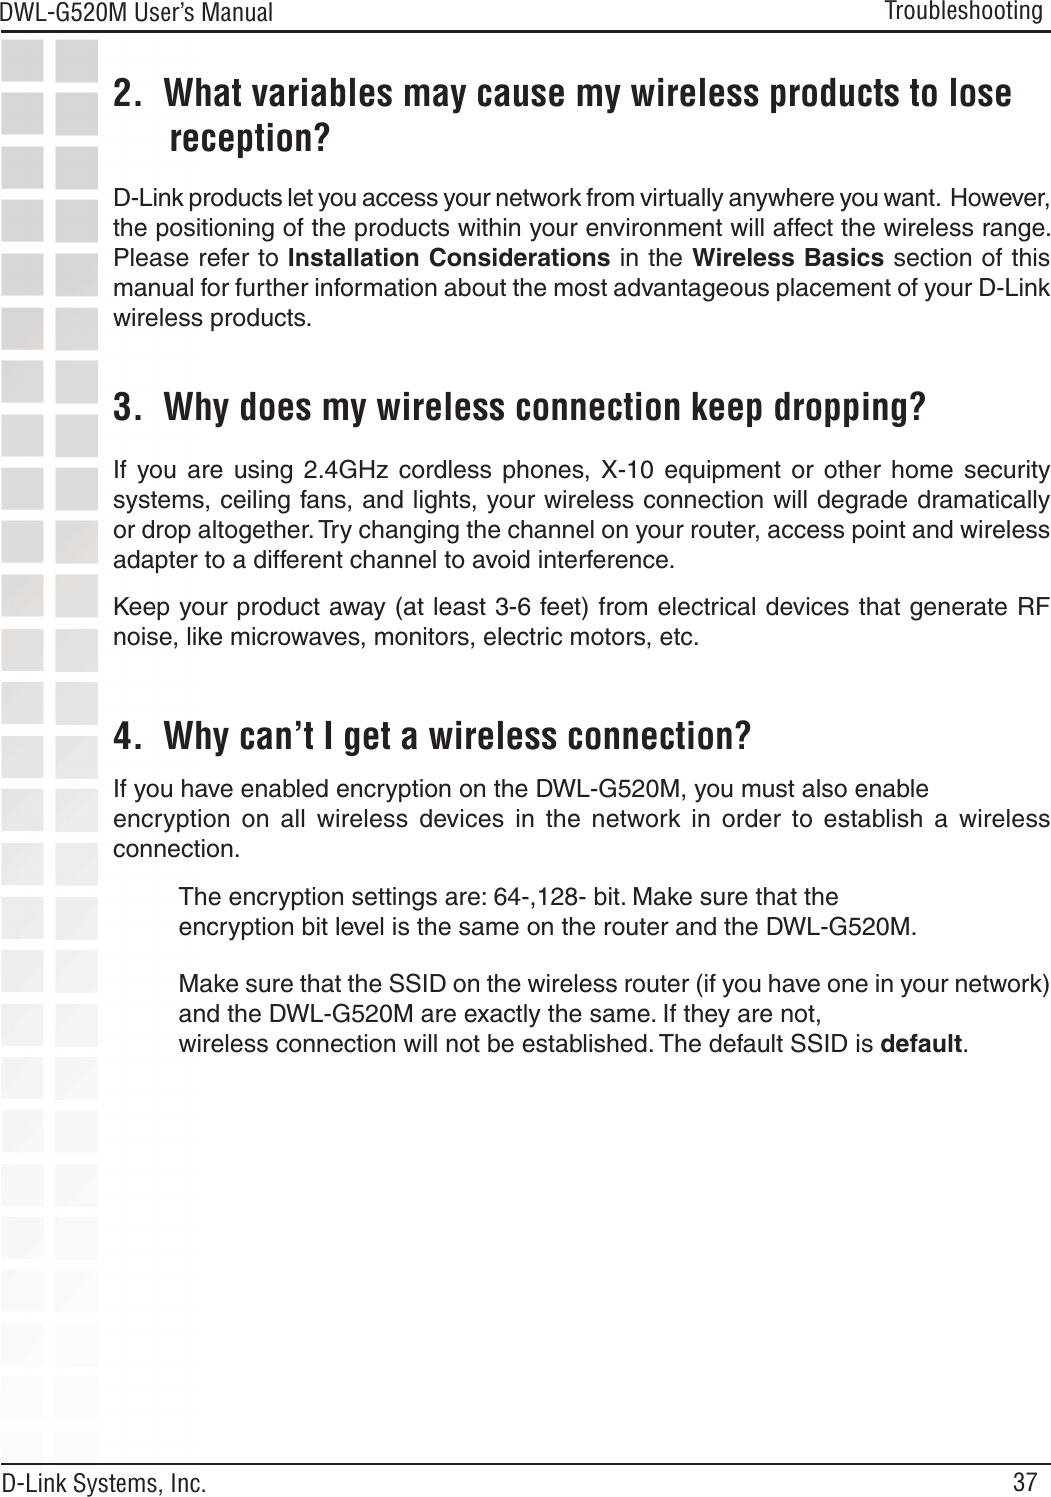 37DWL-G520M User’s Manual D-Link Systems, Inc.Troubleshooting2.  What variables may cause my wireless products to lose        reception?D-Link products let you access your network from virtually anywhere you want.  However, the positioning of the products within your environment will affect the wireless range. Please refer to Installation Considerations in the Wireless Basics section of this manual for further information about the most advantageous placement of your D-Link wireless products.3.  Why does my wireless connection keep dropping?4.  Why can’t I get a wireless connection?If you have enabled encryption on the DWL-G520M, you must also enable encryption  on  all  wireless  devices  in  the  network  in  order  to  establish  a  wireless connection.If  you  are  using  2.4GHz  cordless  phones,  X-10  equipment  or  other  home  security systems, ceiling fans, and lights, your wireless connection will degrade dramatically or drop altogether. Try changing the channel on your router, access point and wireless adapter to a different channel to avoid interference.Keep your product away (at least 3-6 feet) from electrical devices that generate RF noise, like microwaves, monitors, electric motors, etc.The encryption settings are: 64-,128- bit. Make sure that the encryption bit level is the same on the router and the DWL-G520M.Make sure that the SSID on the wireless router (if you have one in your network) and the DWL-G520M are exactly the same. If they are not, wireless connection will not be established. The default SSID is default.